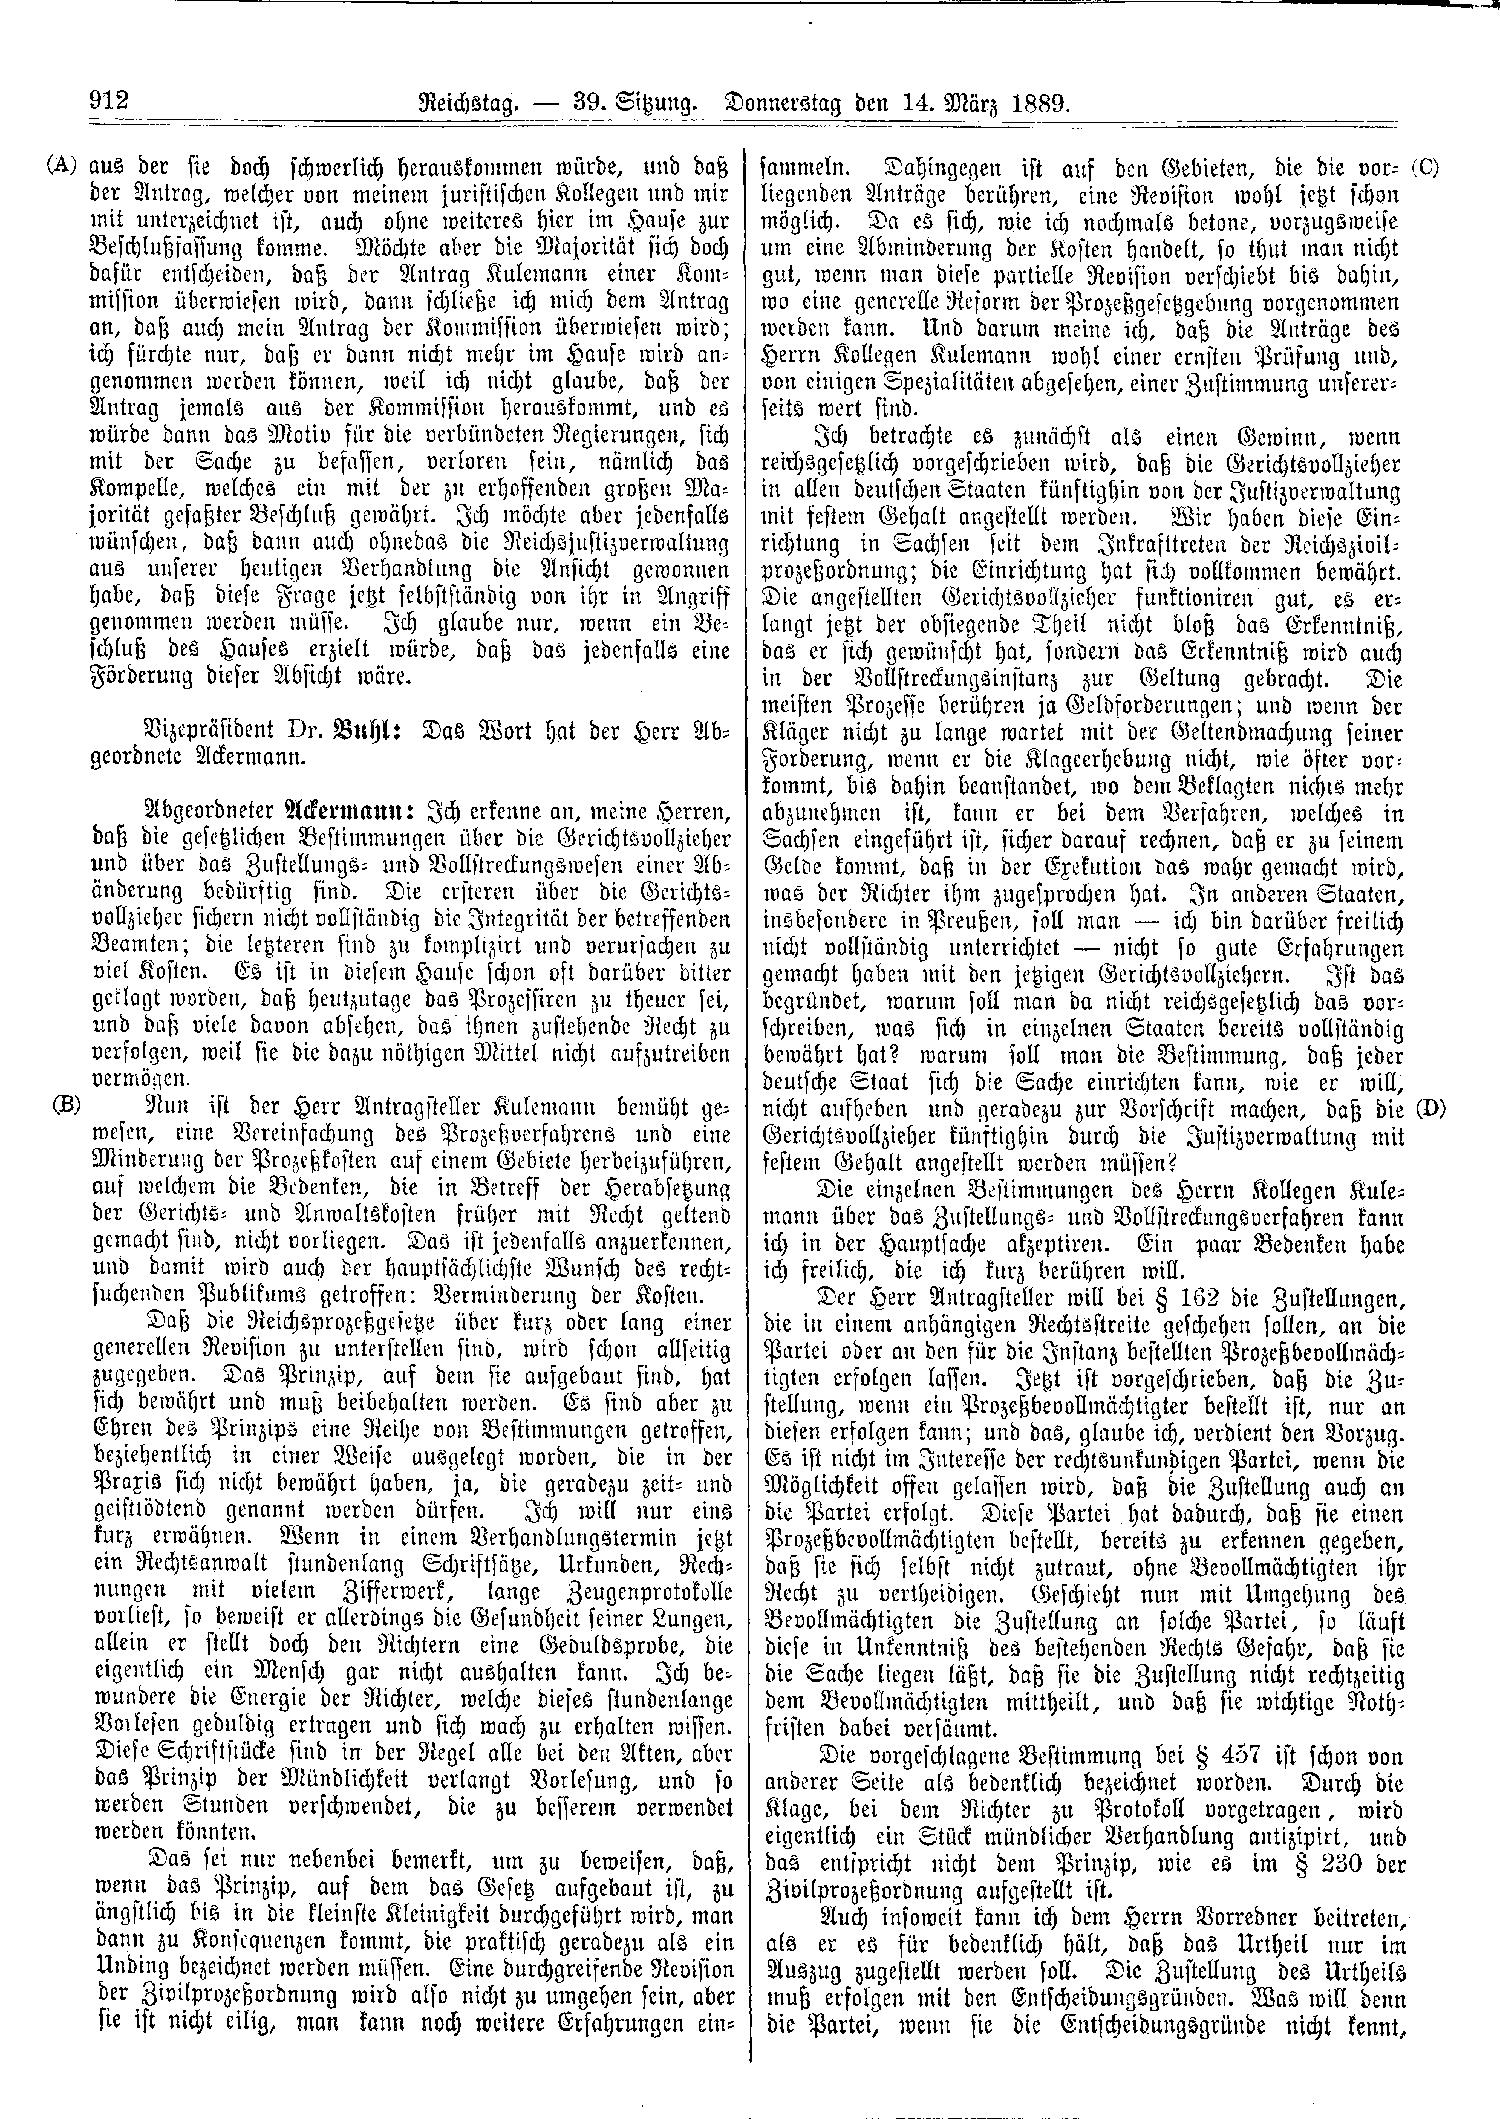 Scan of page 912